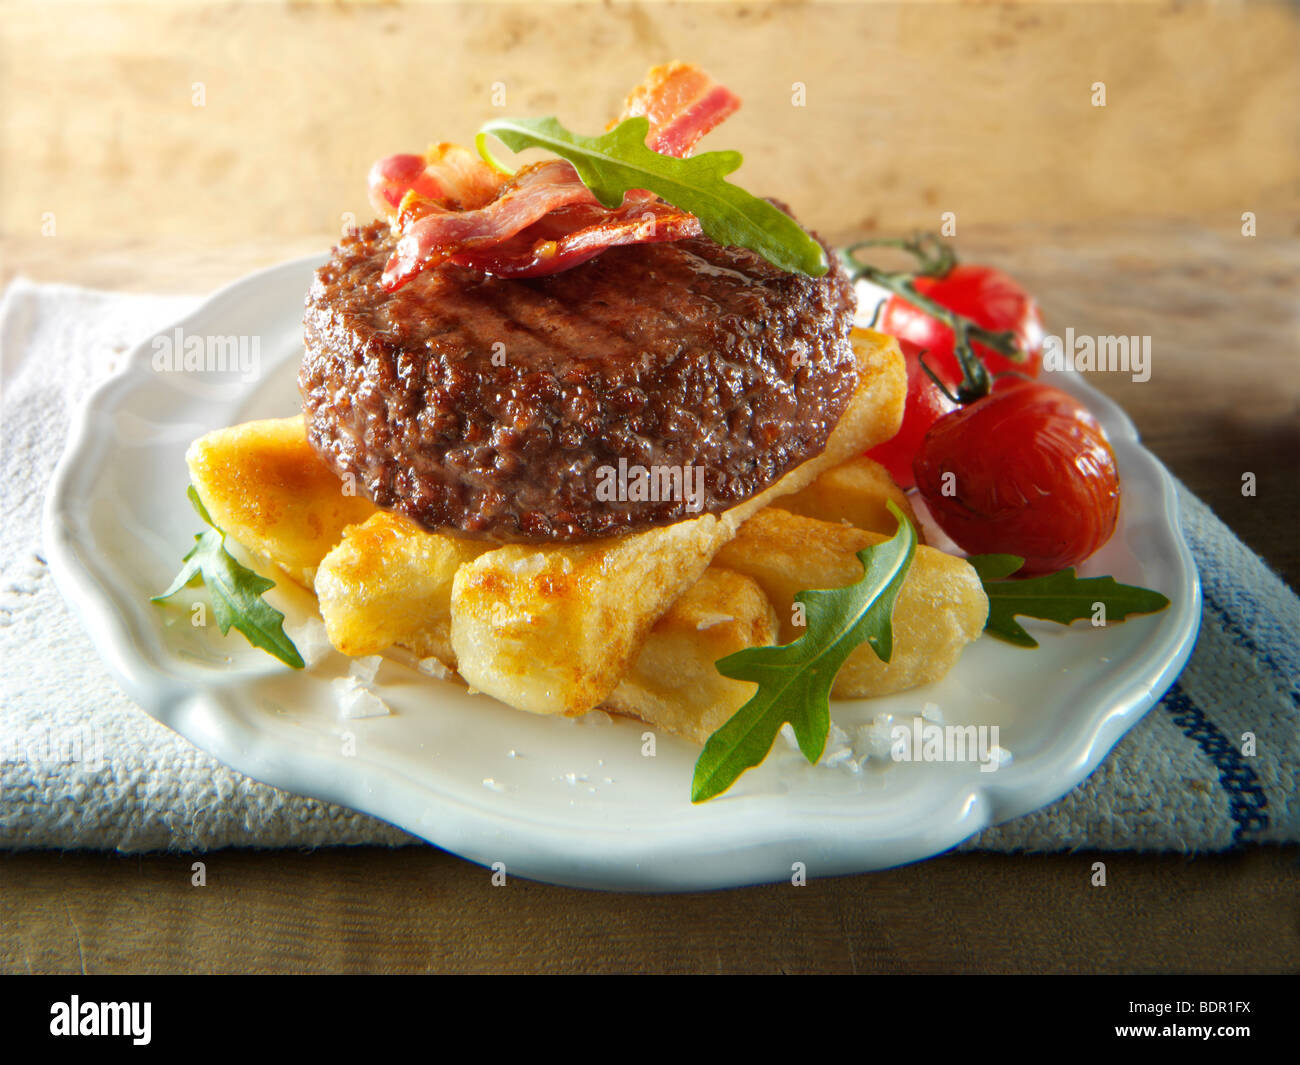 Char grilled beef burger and bacon with chunky chips and salad Stock Photo